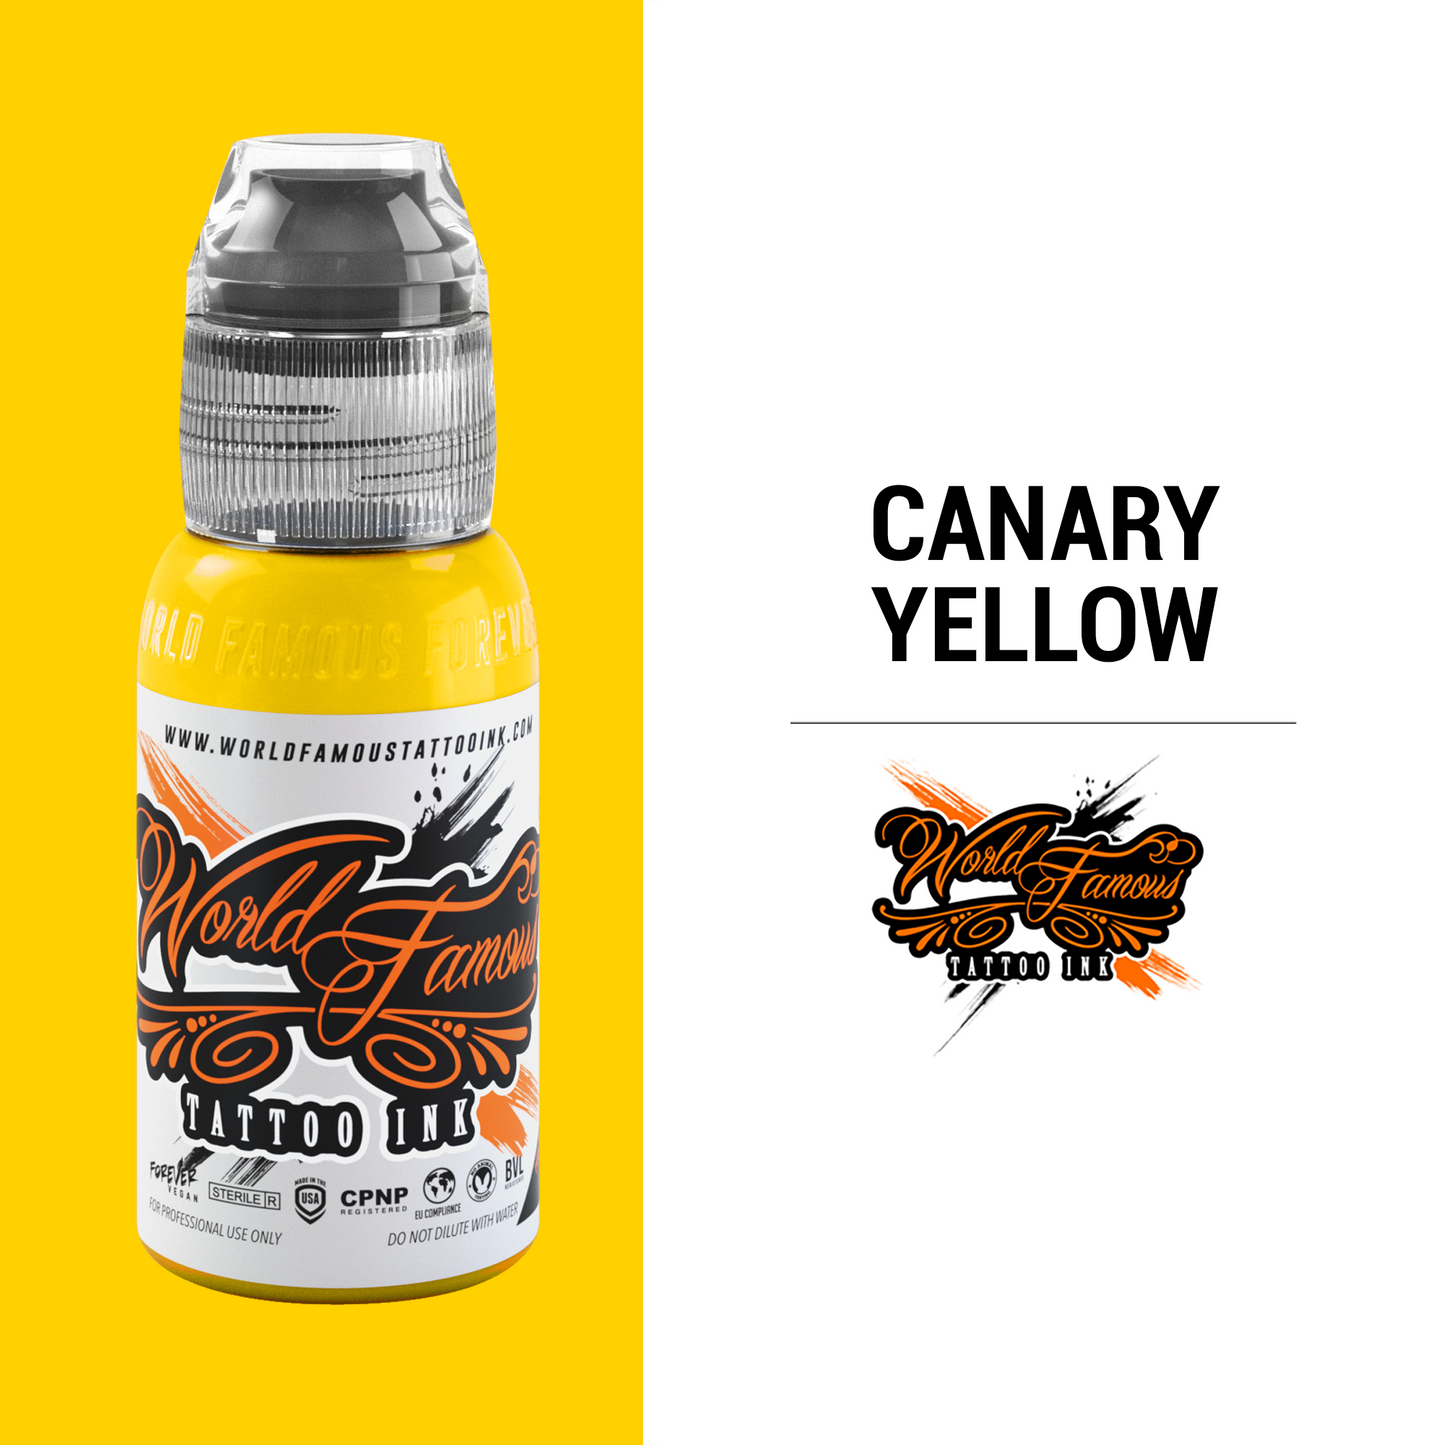 Canary Yellow | World Famous Tattoo Ink